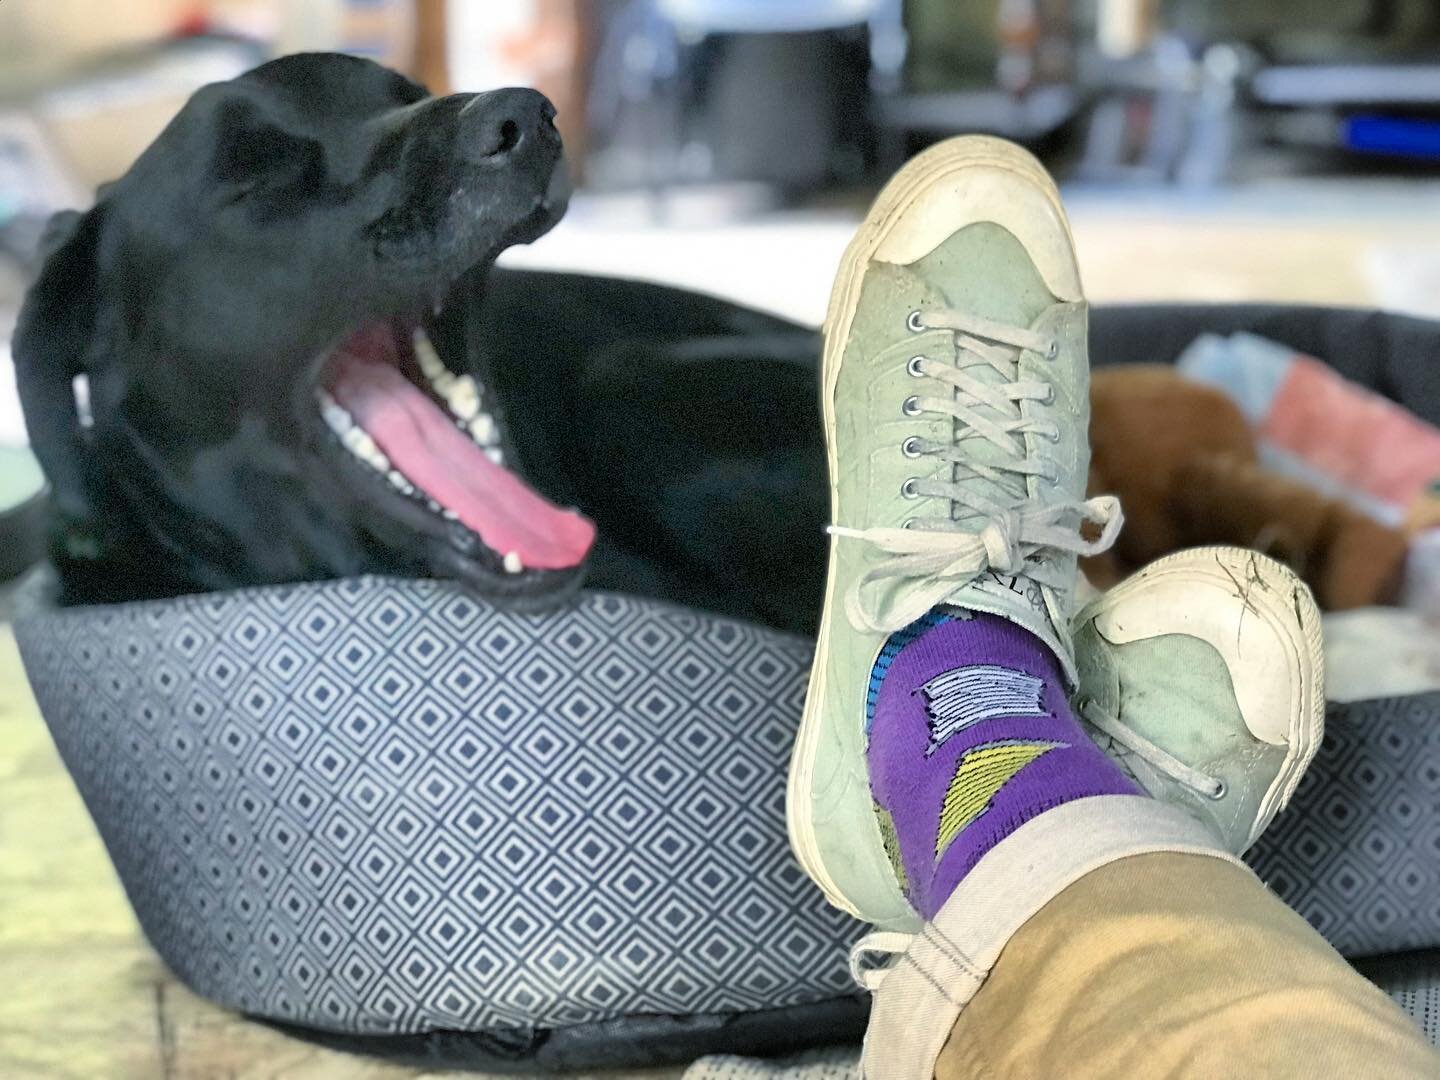 Henceforth all of my product photos will feature our yawning dog 🥳
(Imagine he&rsquo;s shouting &lsquo;roll up, roll up, get your sewing thread socks here! Chapeau wants more treats!&rsquo;)